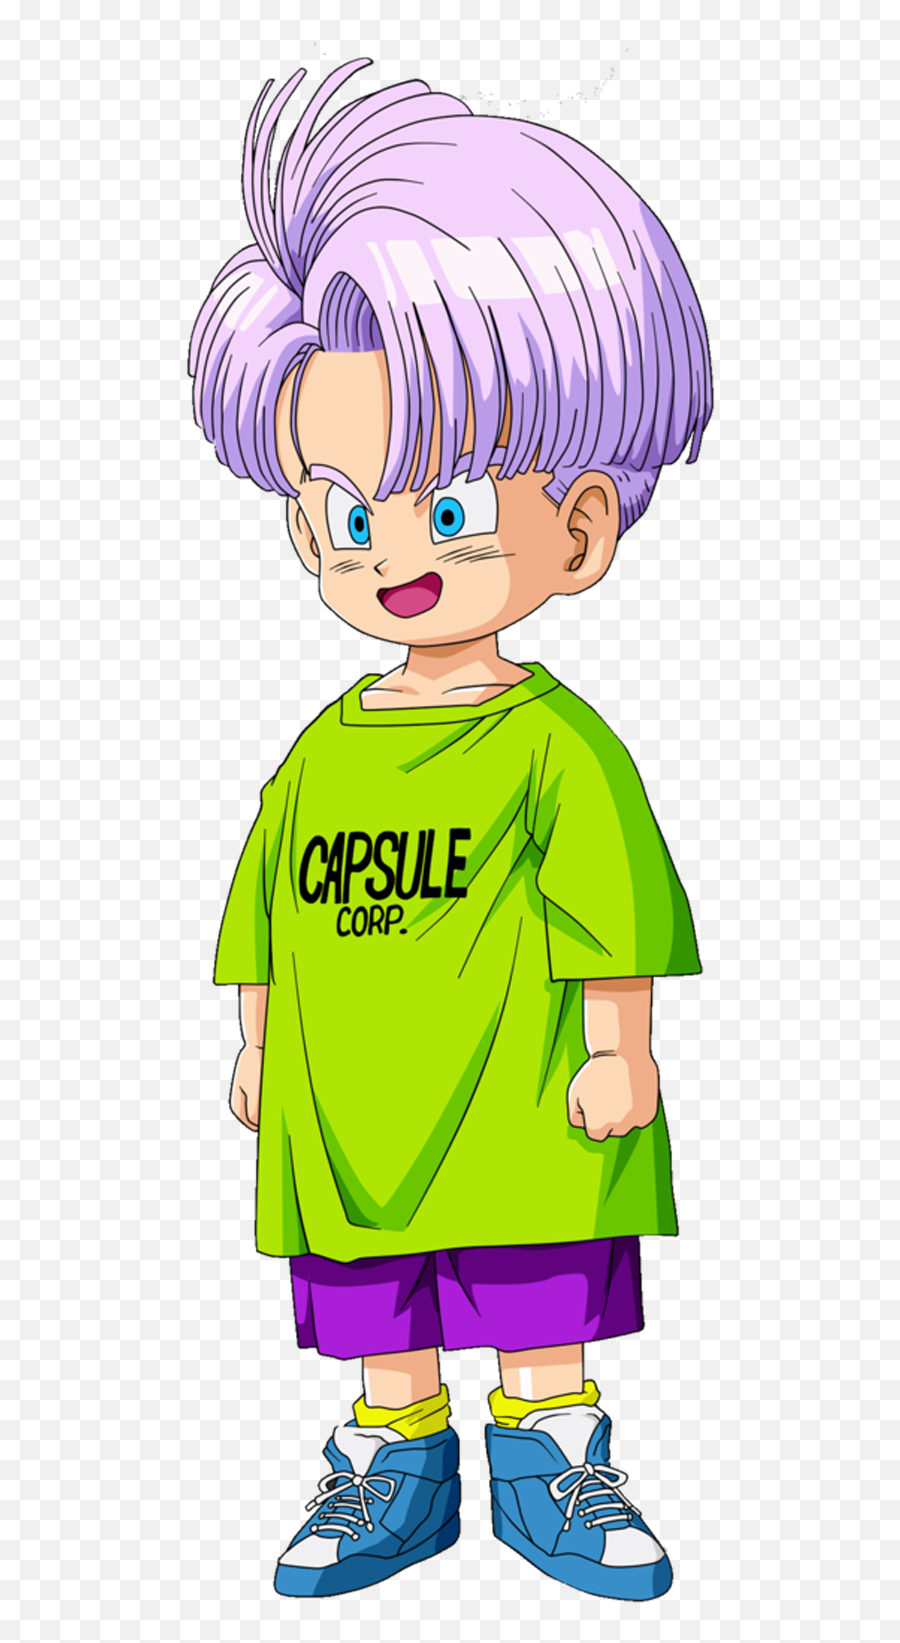 Download Share This Image - Dragon Ball Z Trunks Png Image Kid Trunks Icon,Dragon Ball Z Icon